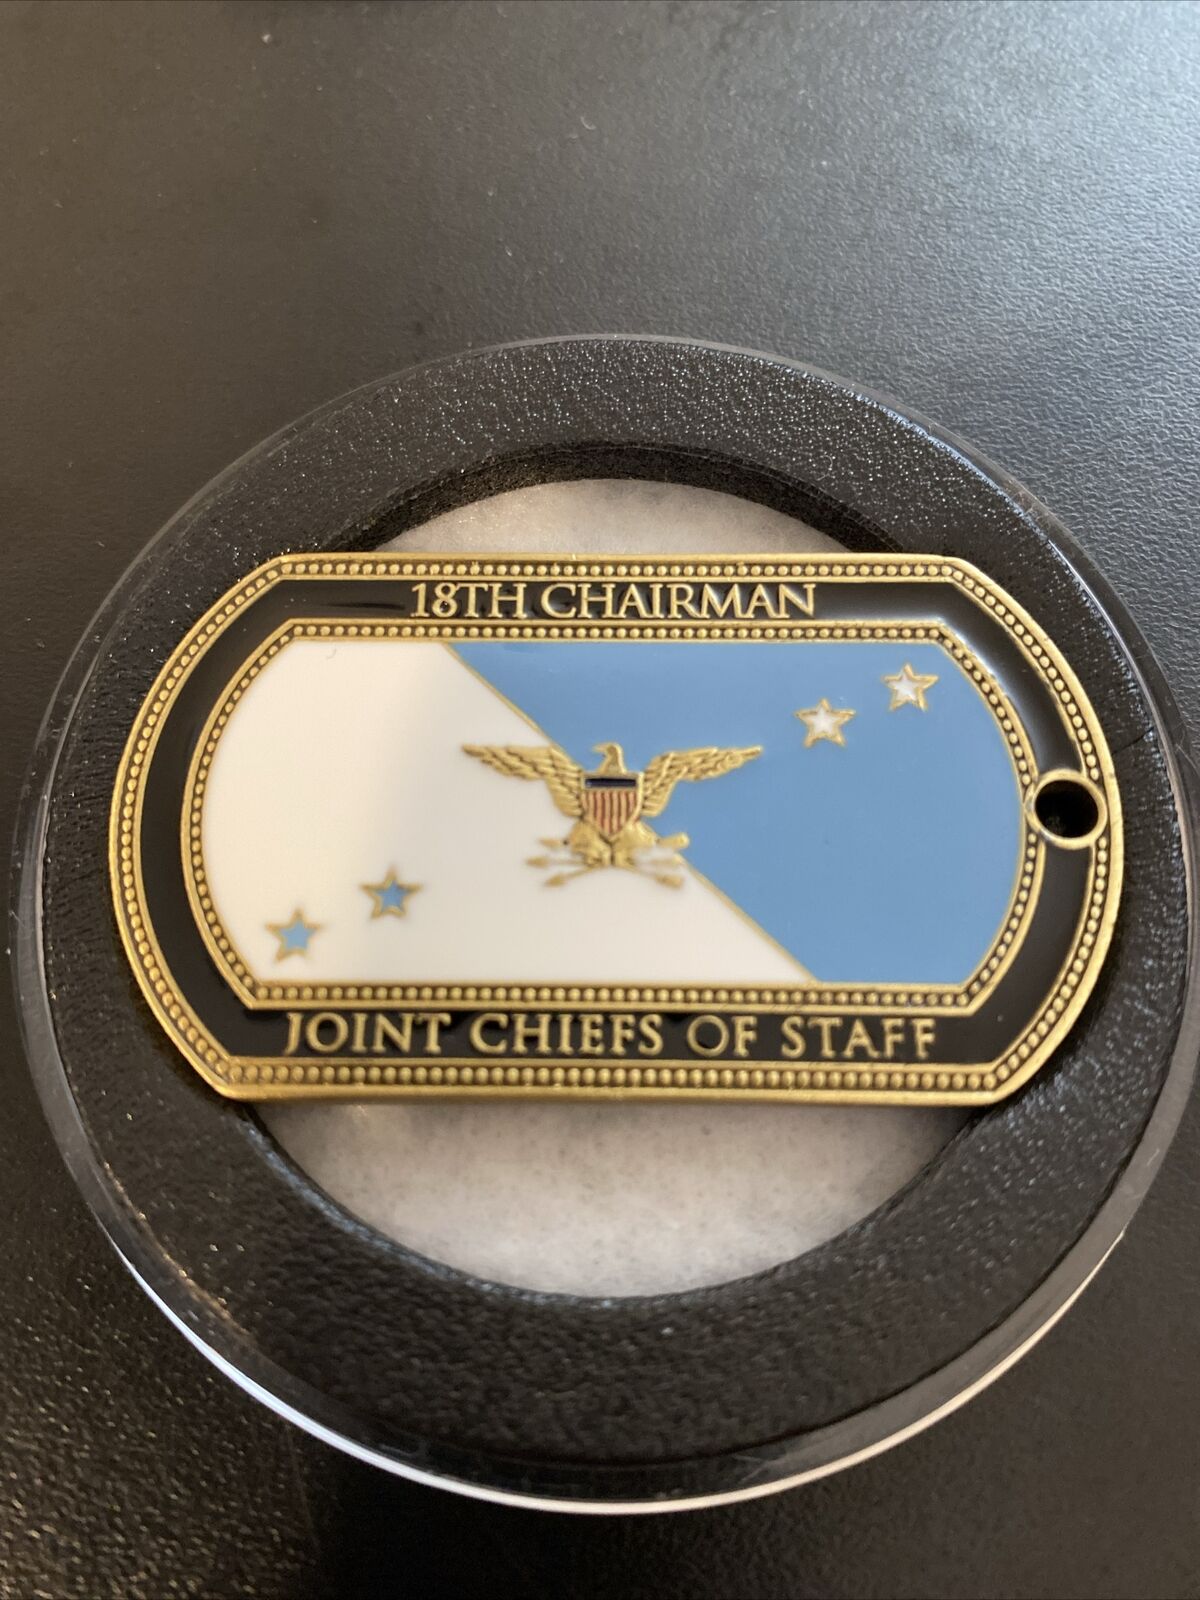 Chairman Joint Chiefs of Staff (18th) General Martin Dempsey Challenge Coin